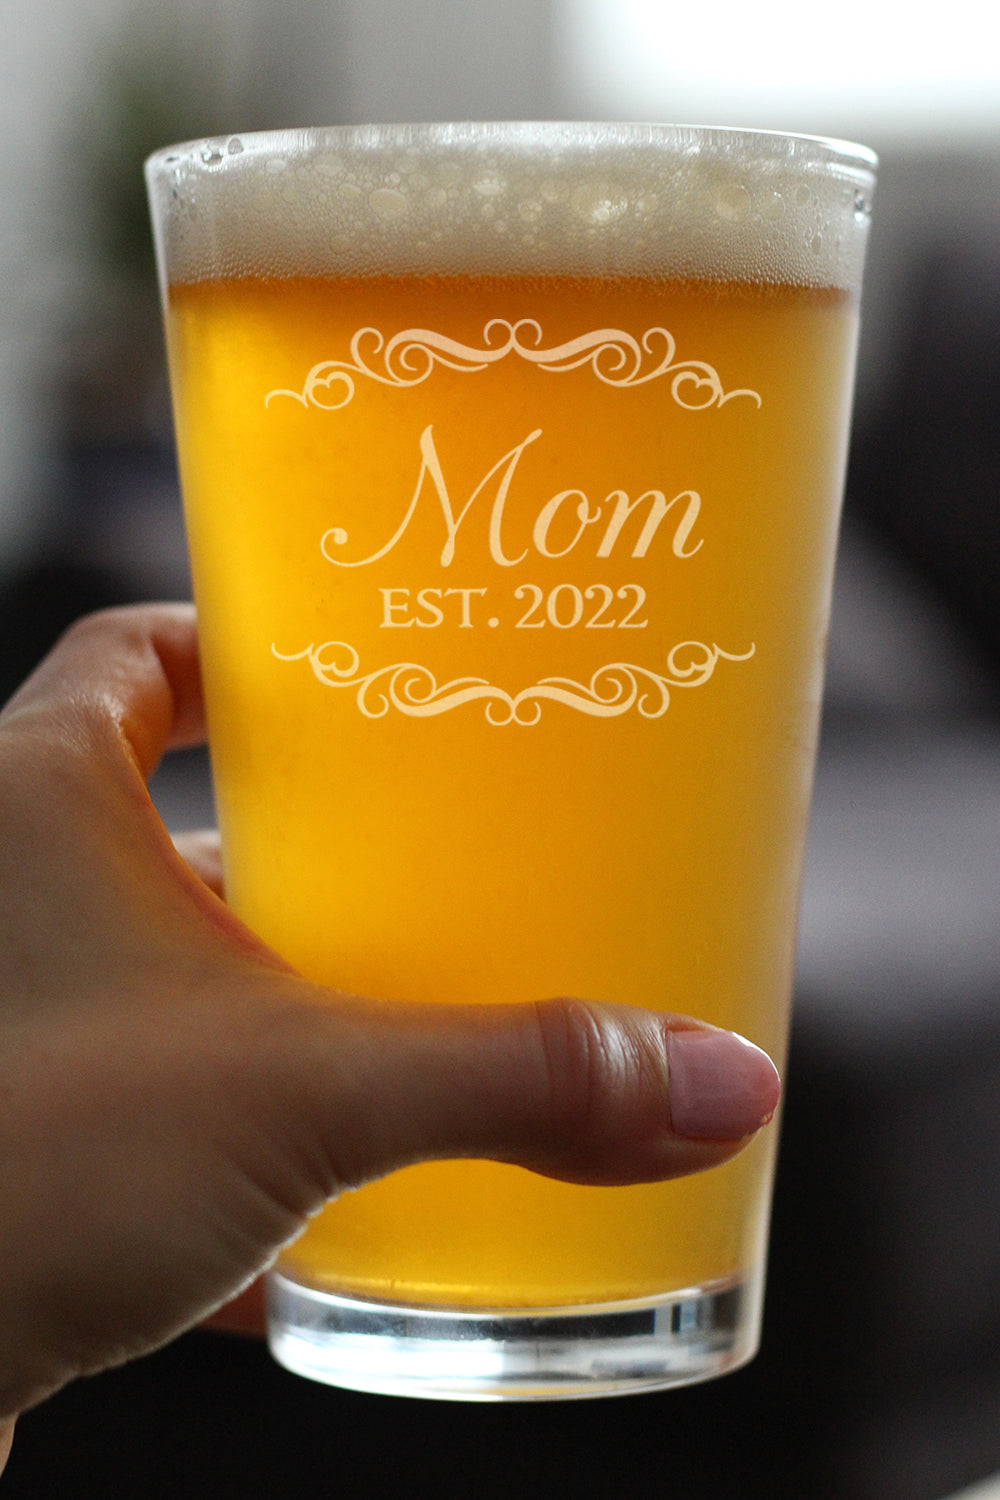 Mom Est 2022 - New Mother Pint Glass Gift for First Time Parents - Decorative 16 Oz Glasses